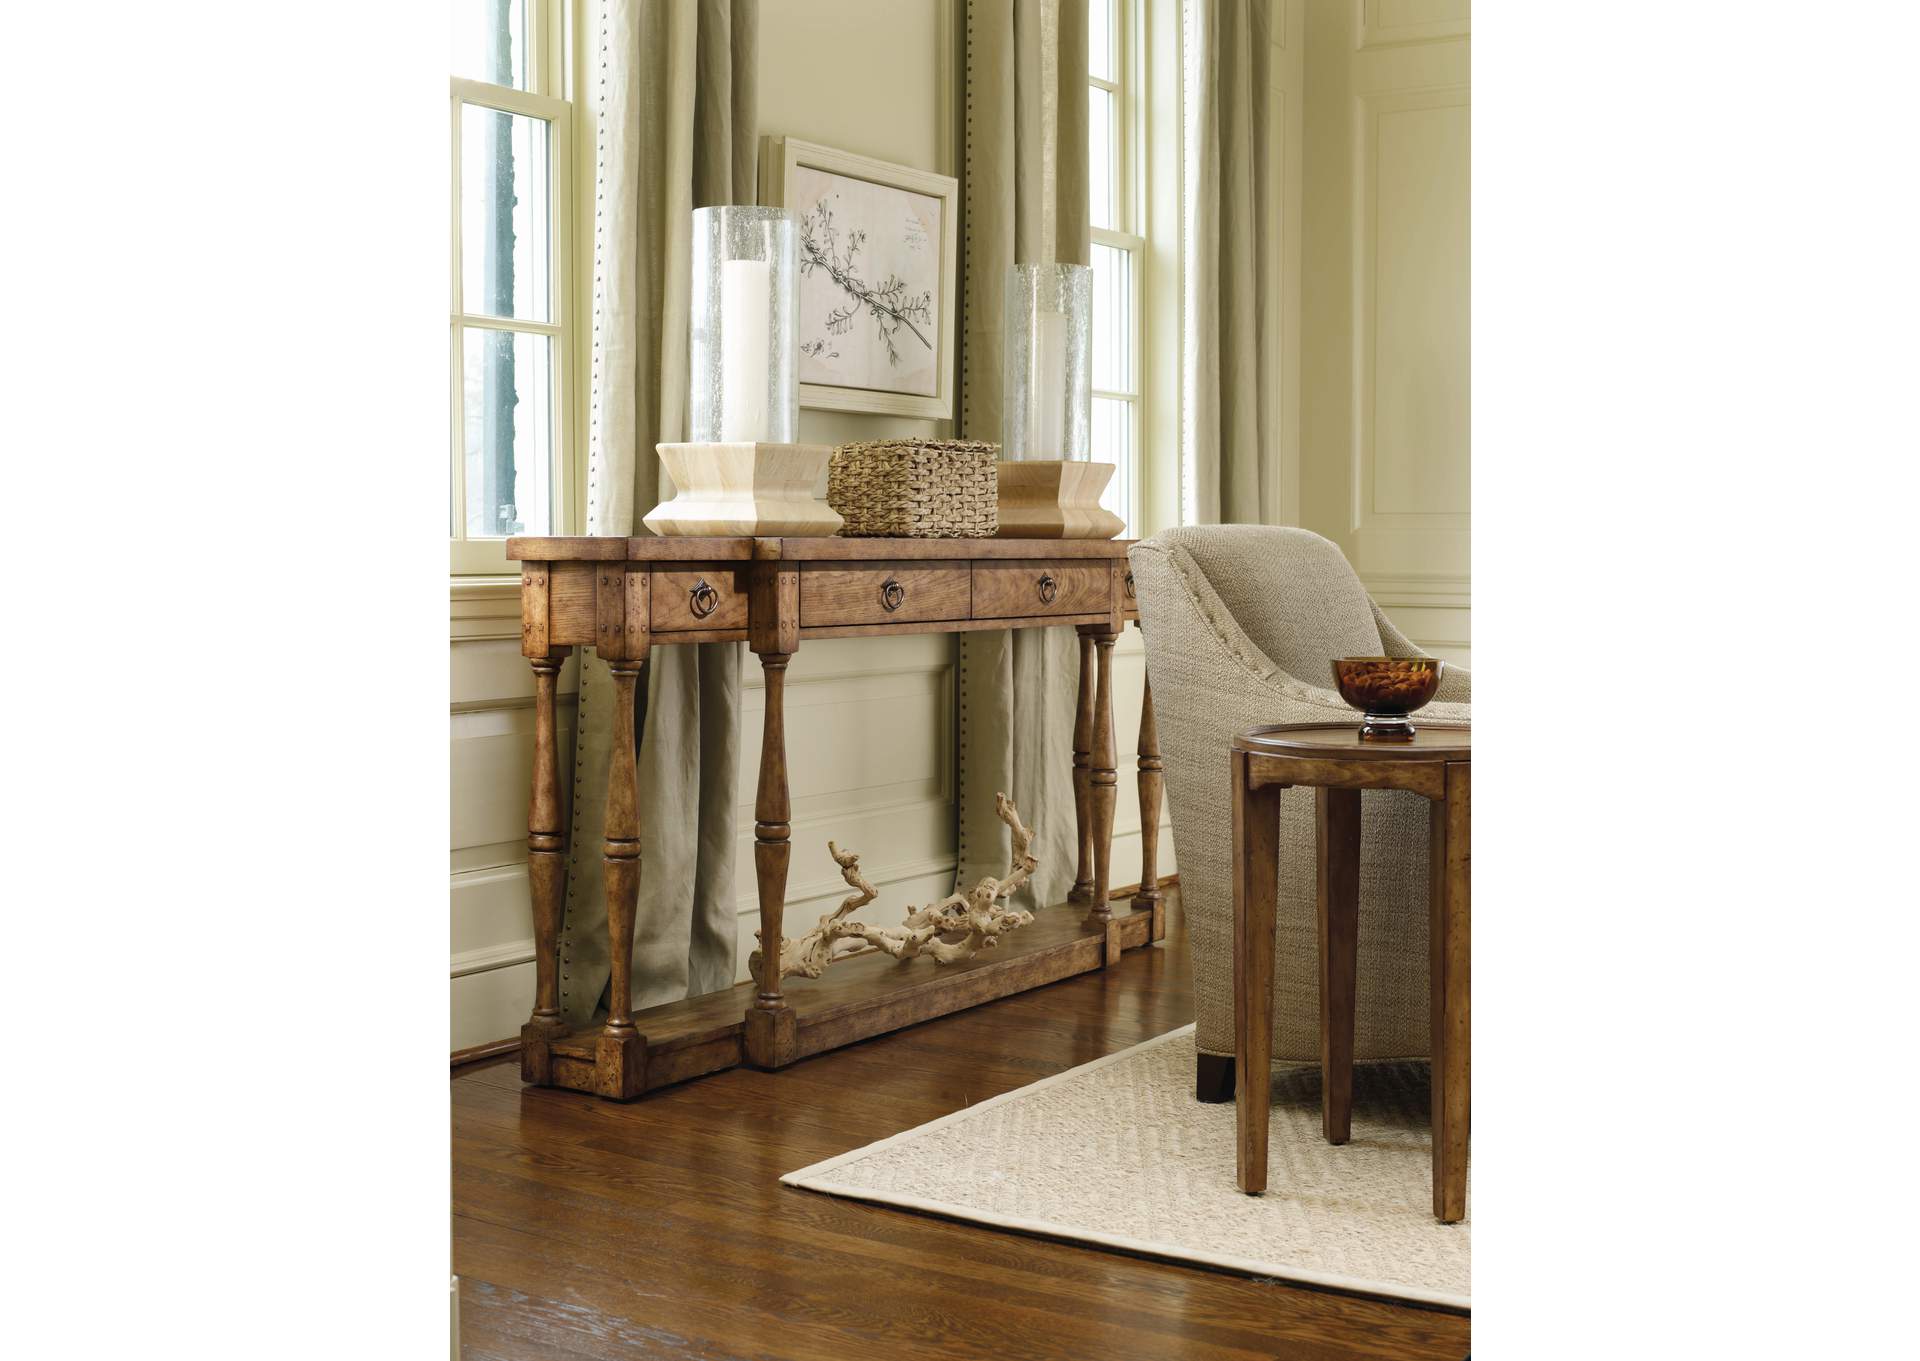 Sanctuary Four-Drawer Thin Console - Drift,Hooker Furniture